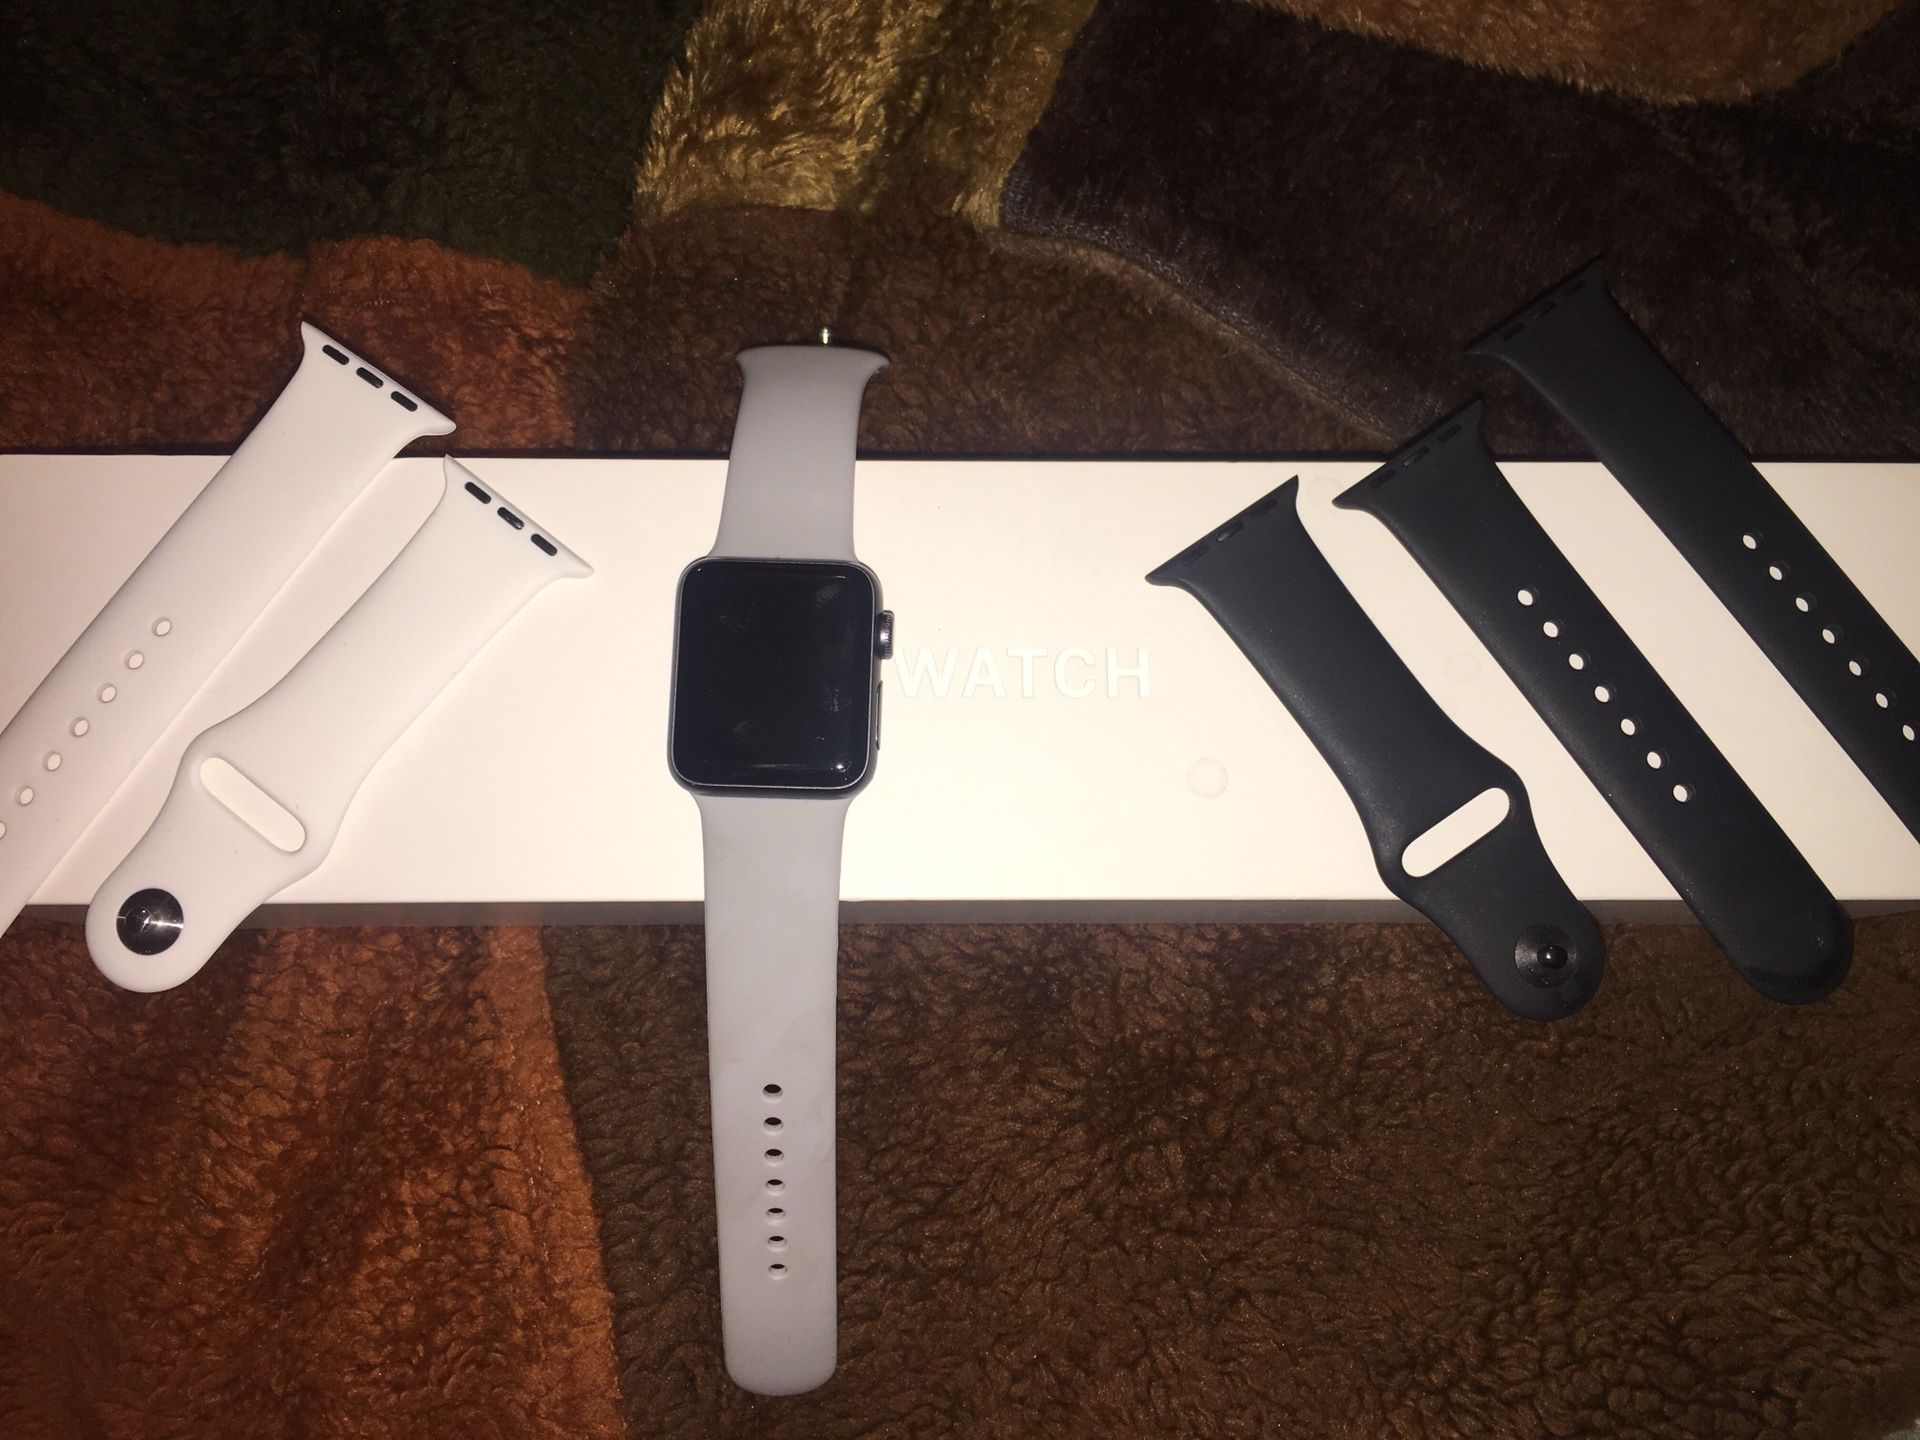 Apple Watch Series 3 + Bands